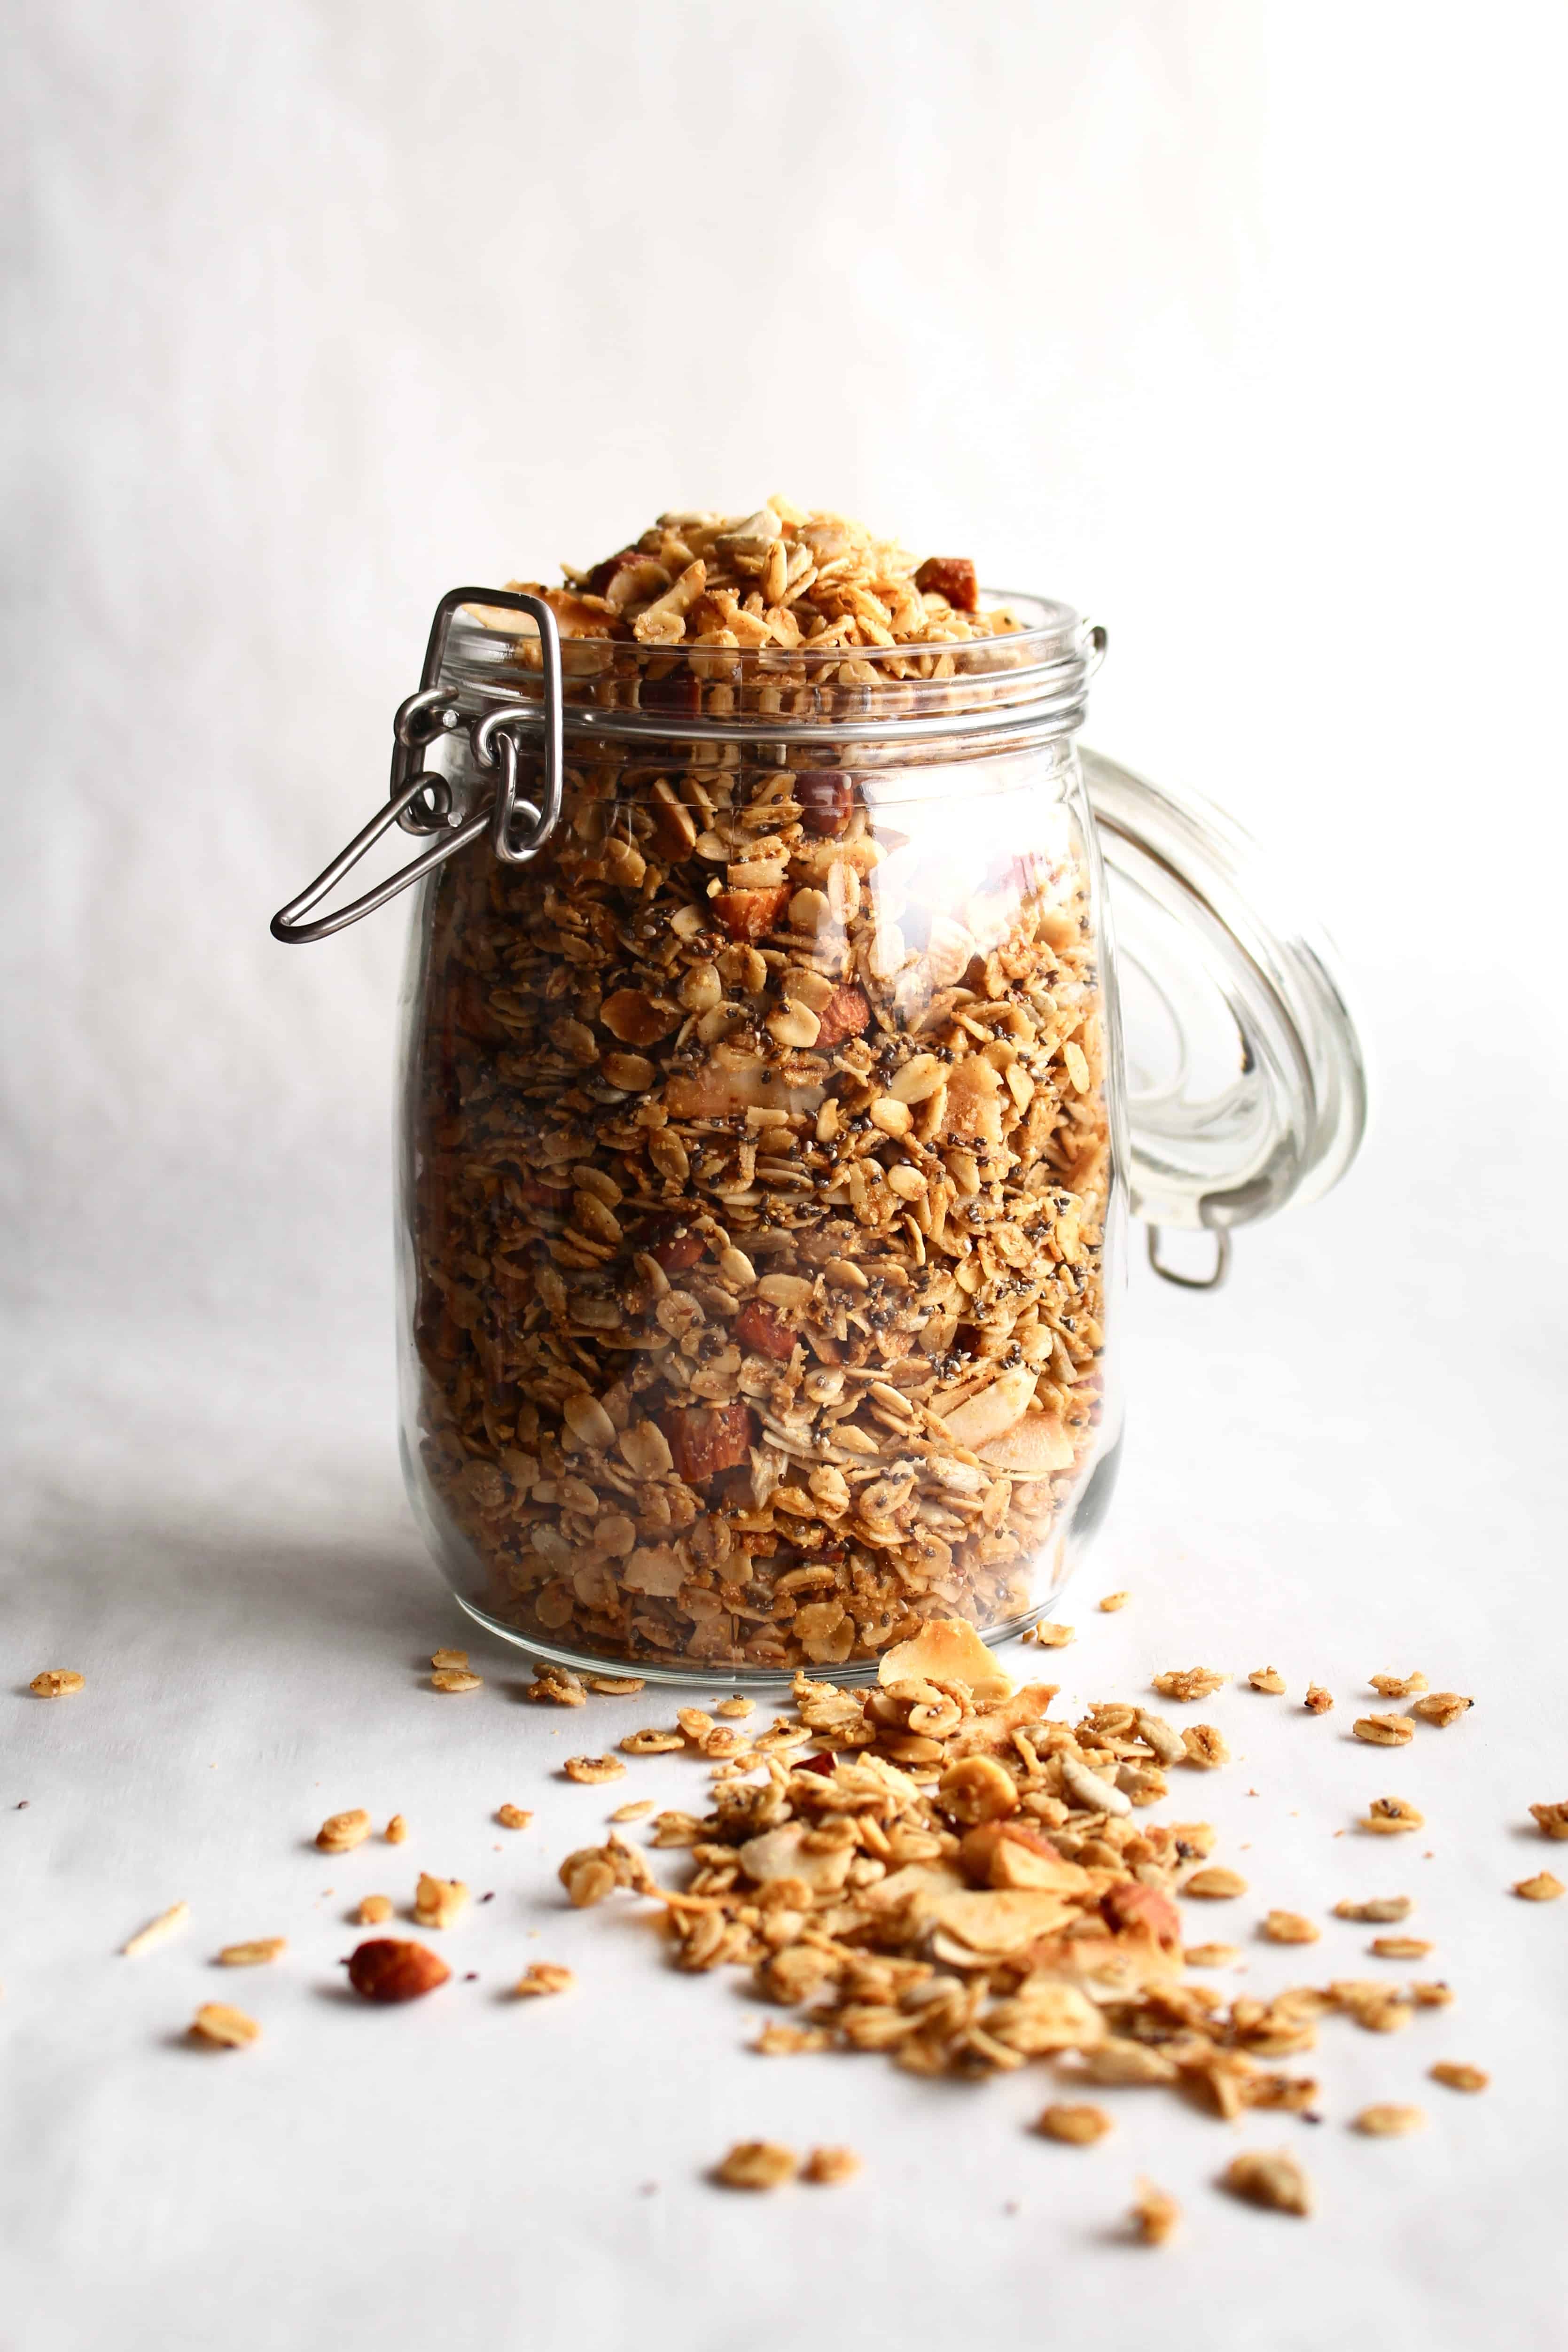 Homemade granola is easier than you think! This granola recipe uses flaxseed and chia seeds to make it extra healthy with a boost of omega-3 fatty acids! #homemade #granola #healthy #flax #flaxseed #chia #chiaseed #granolabars #breakfast #brunch